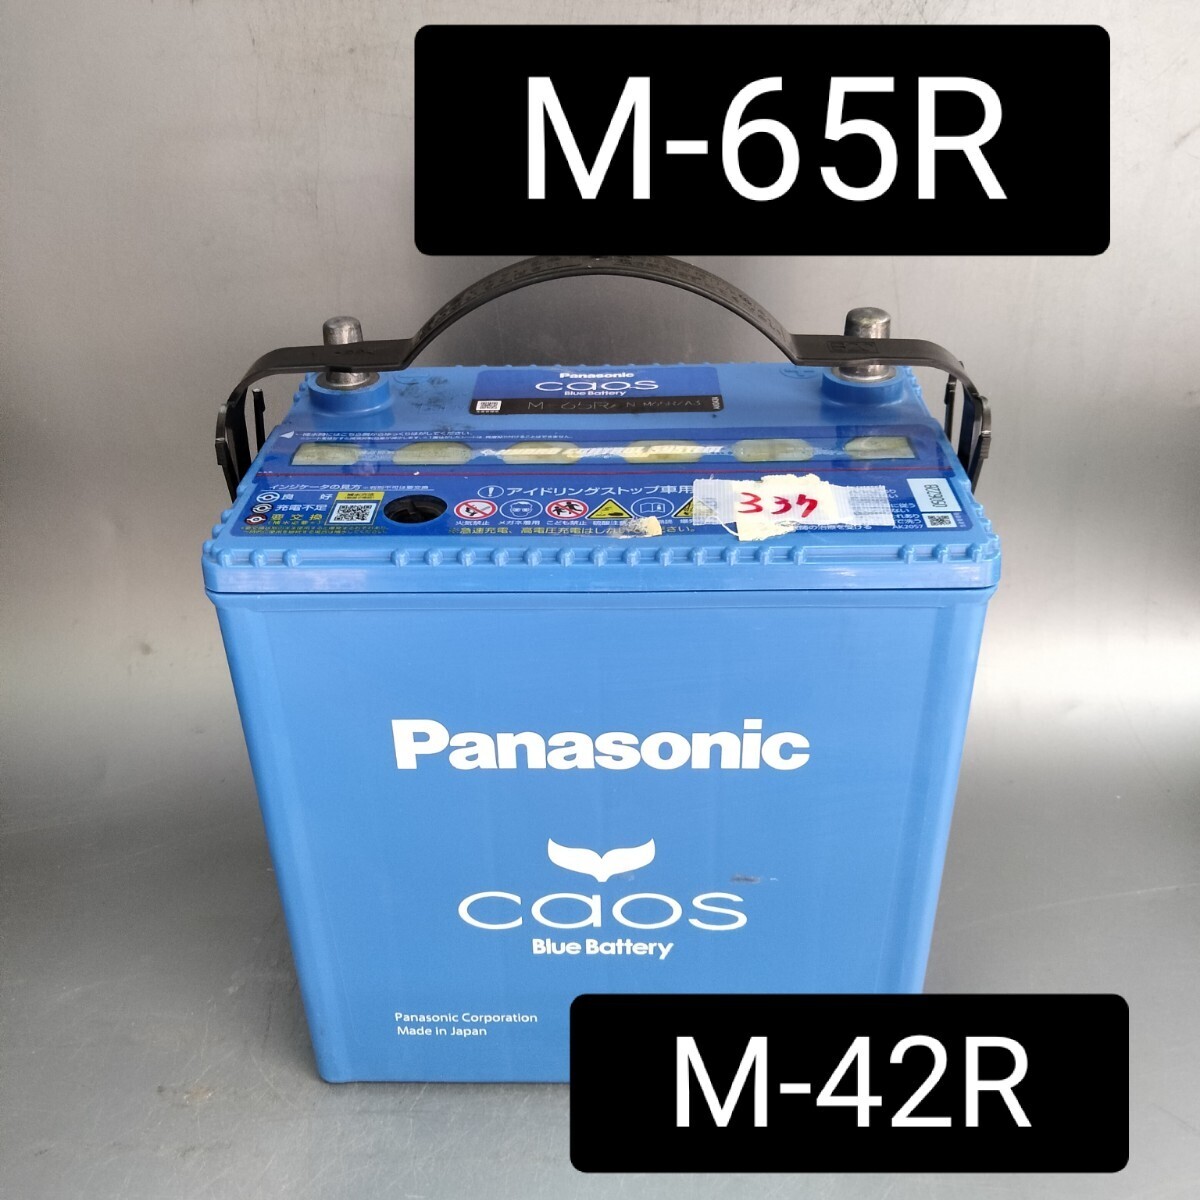 [ used 337 postage included ] Panasonic /M-65R/ battery /M-42R/M-55R/M-60R/B20R/M42R/M50R/M60R/M65R/ Okinawa, remote island Area un- possible /Panasonic